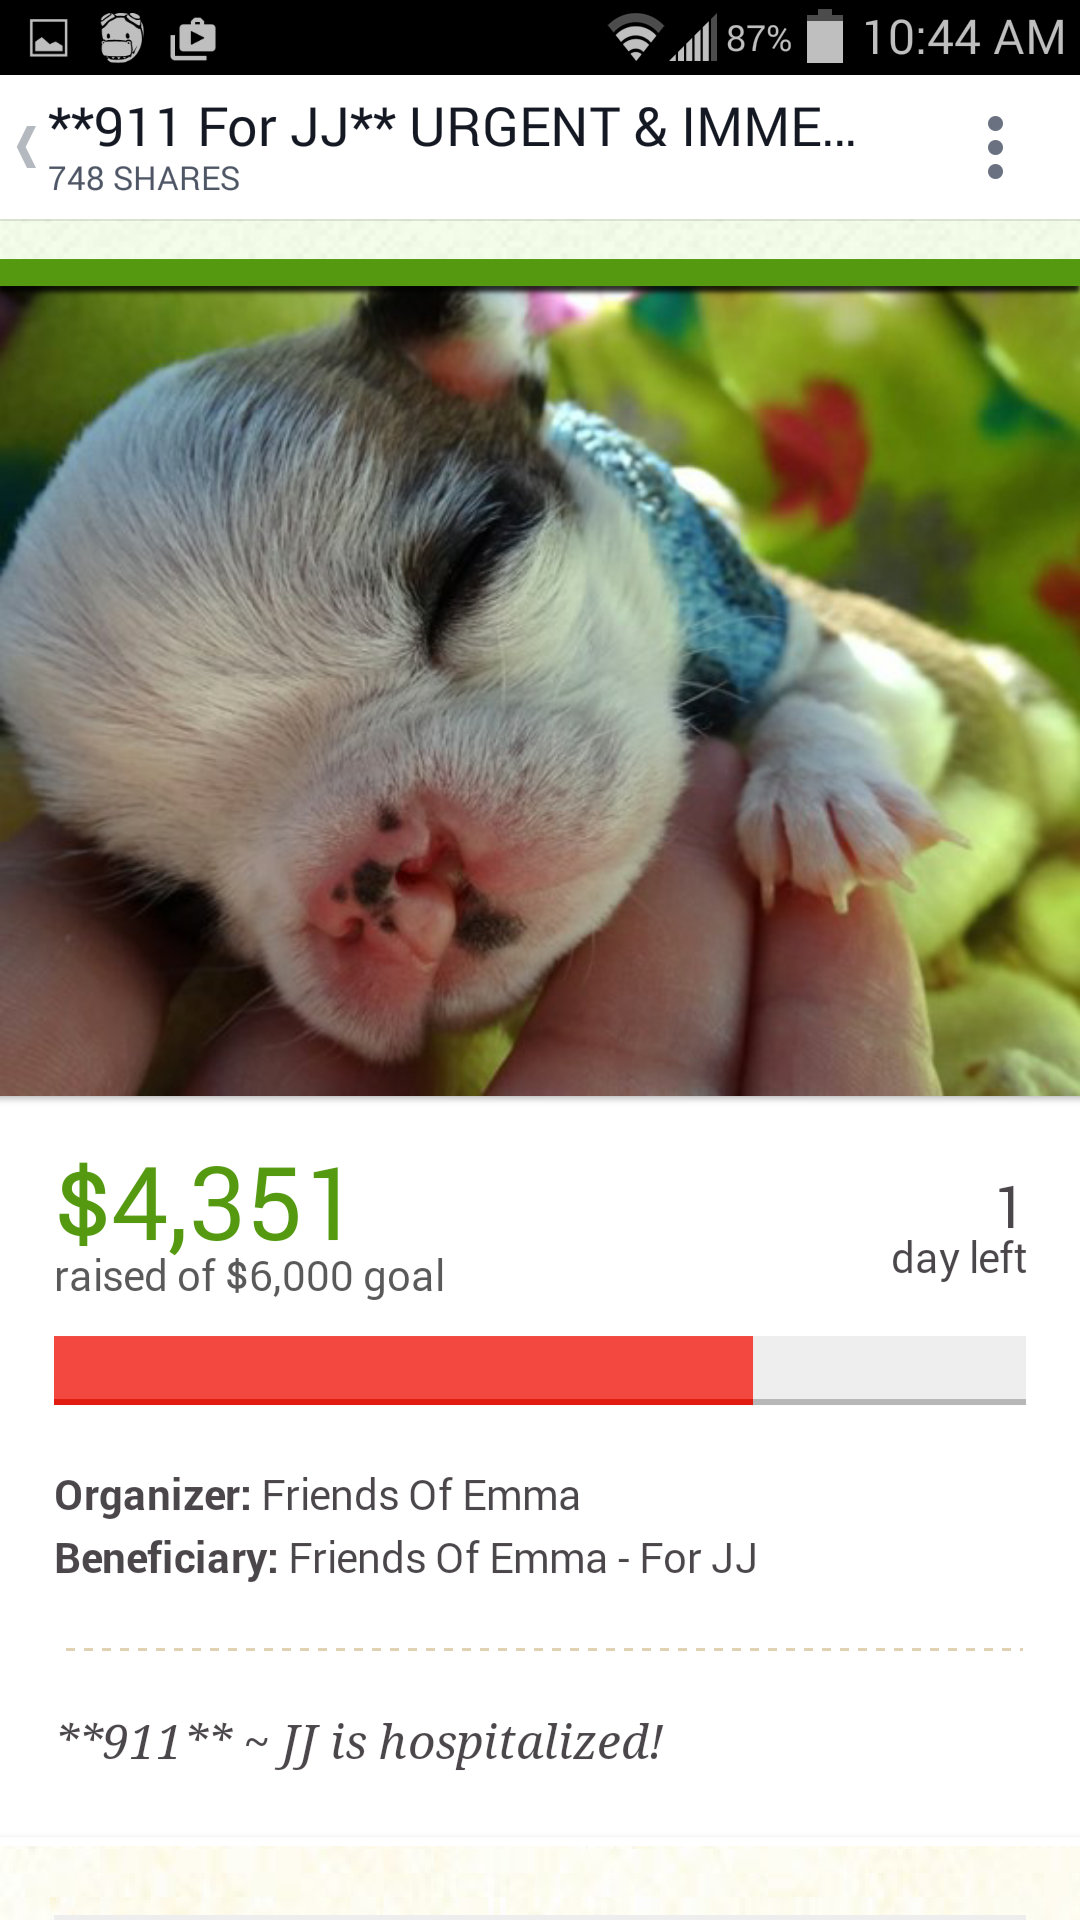 2nd fundraiser, same animal, different name
This dog died six days after Elizabeth received him.  